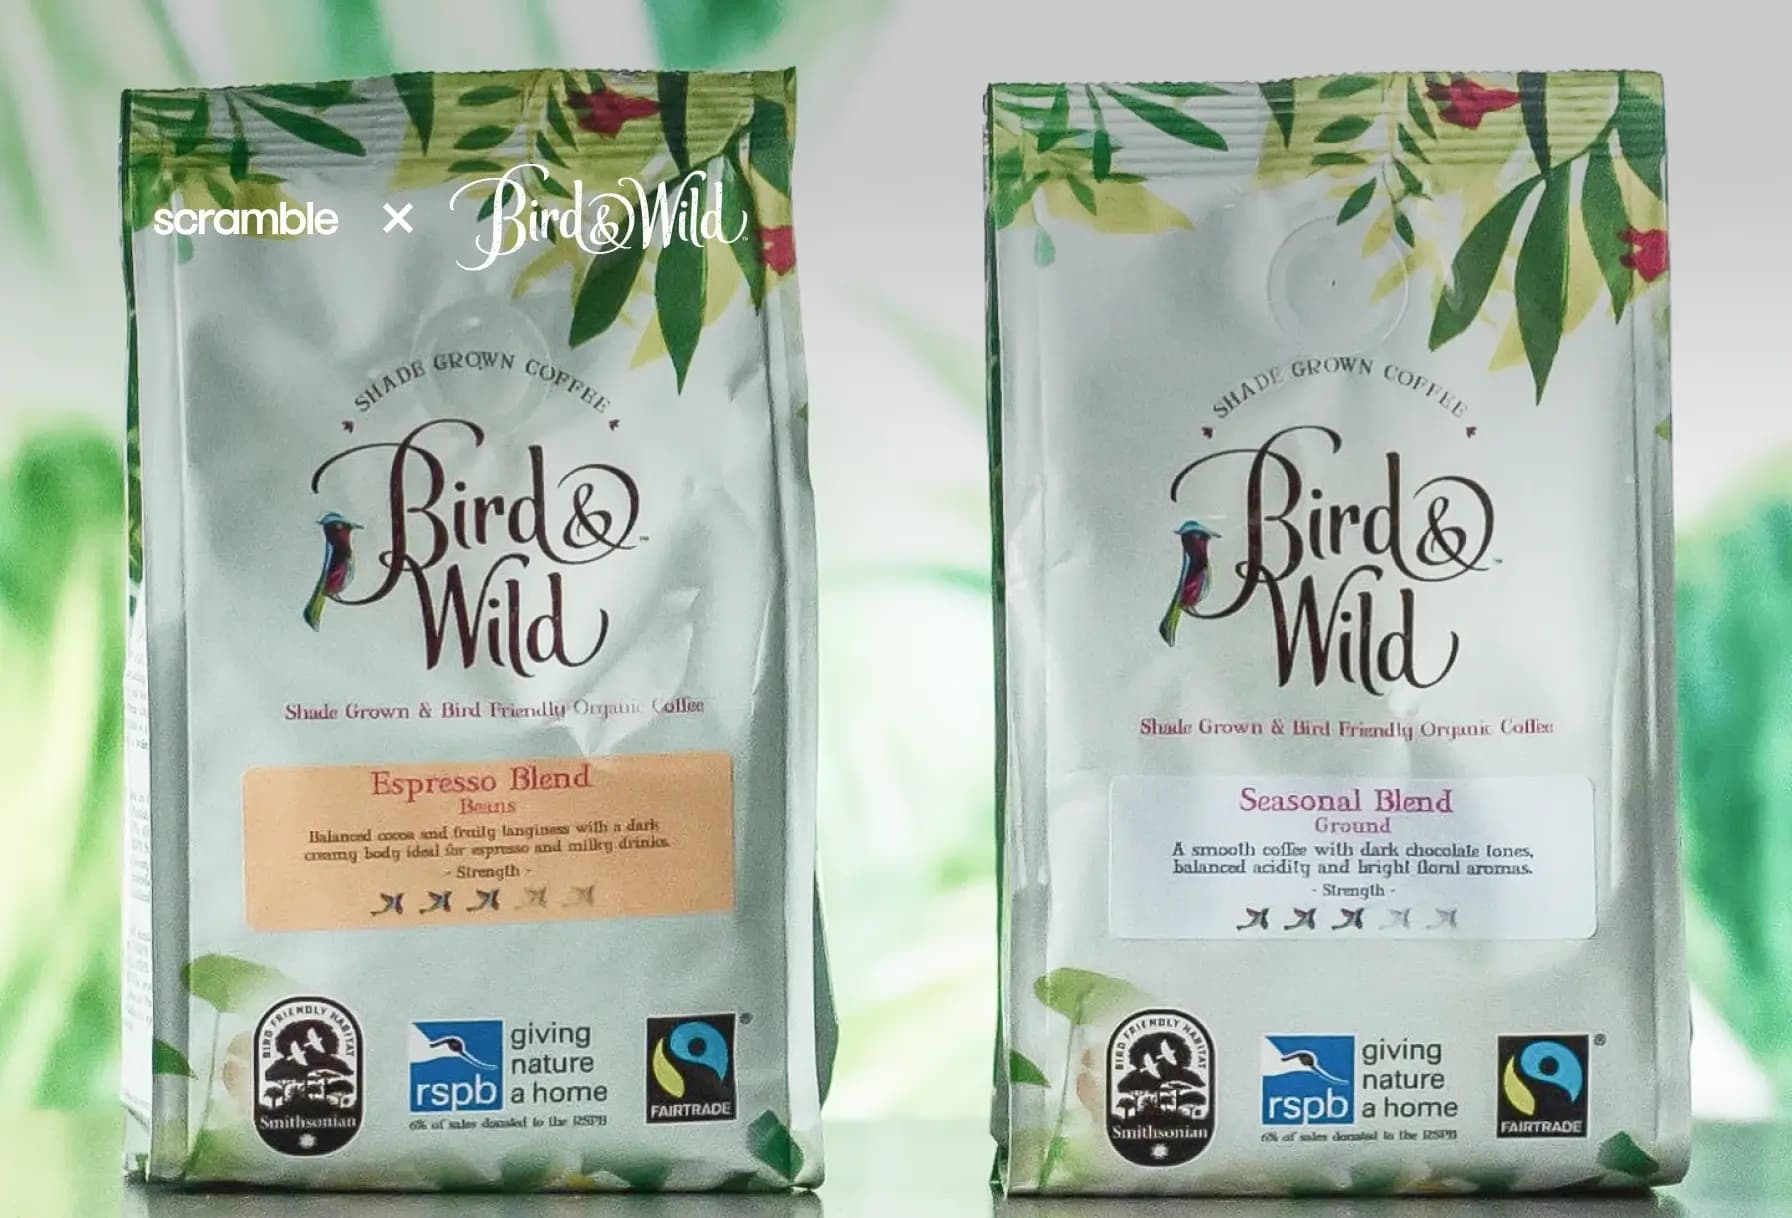 Bird & Wild: A Win-Win for Nature and Coffee Lovers